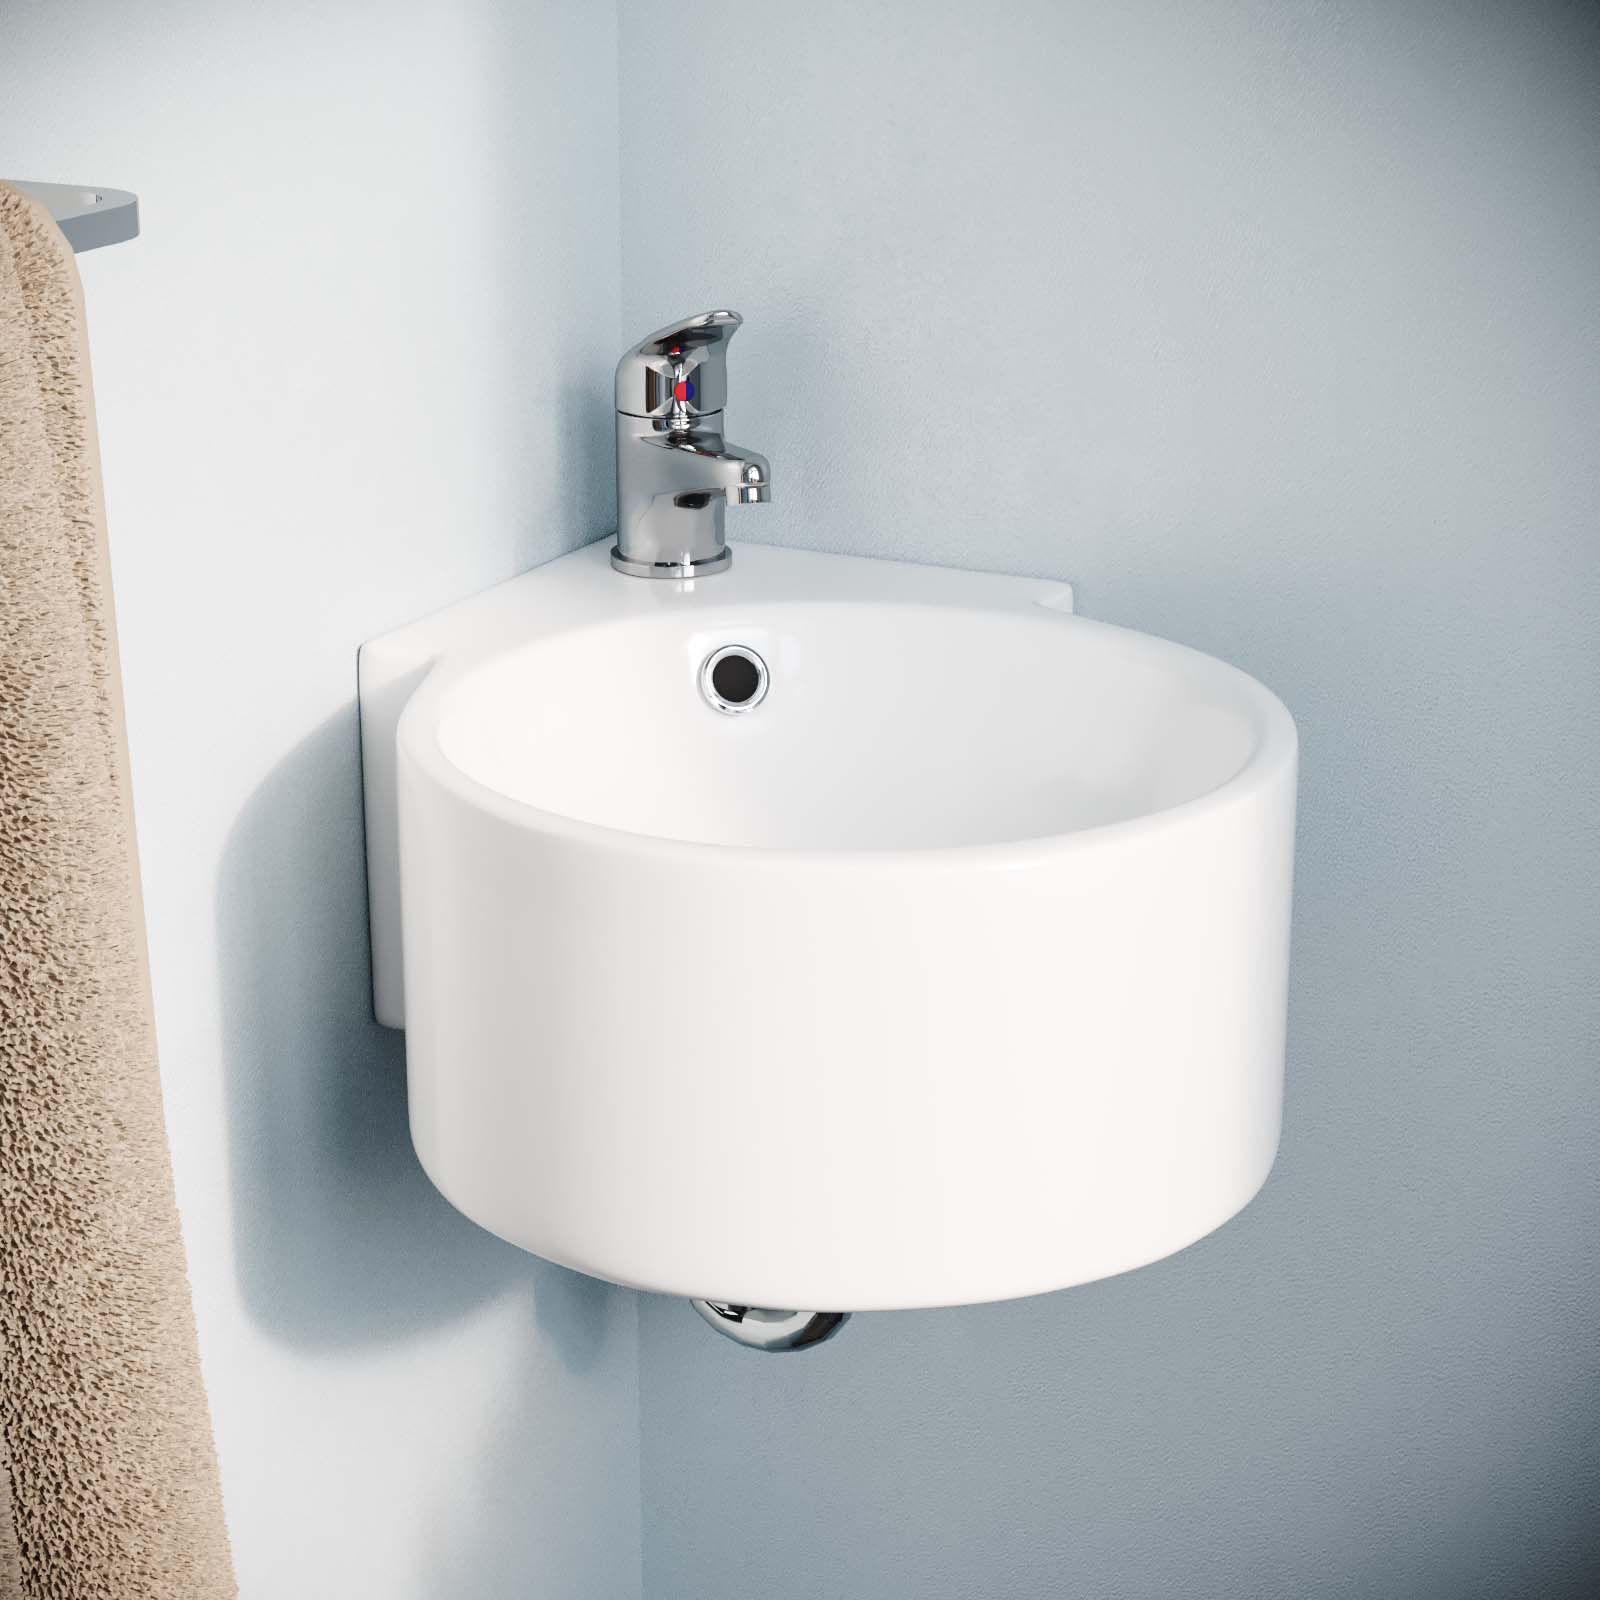 300 X 435mm Bathroom Wall Hung Cloakroom Ceramic Compact Corner Basin Sink And Fittings